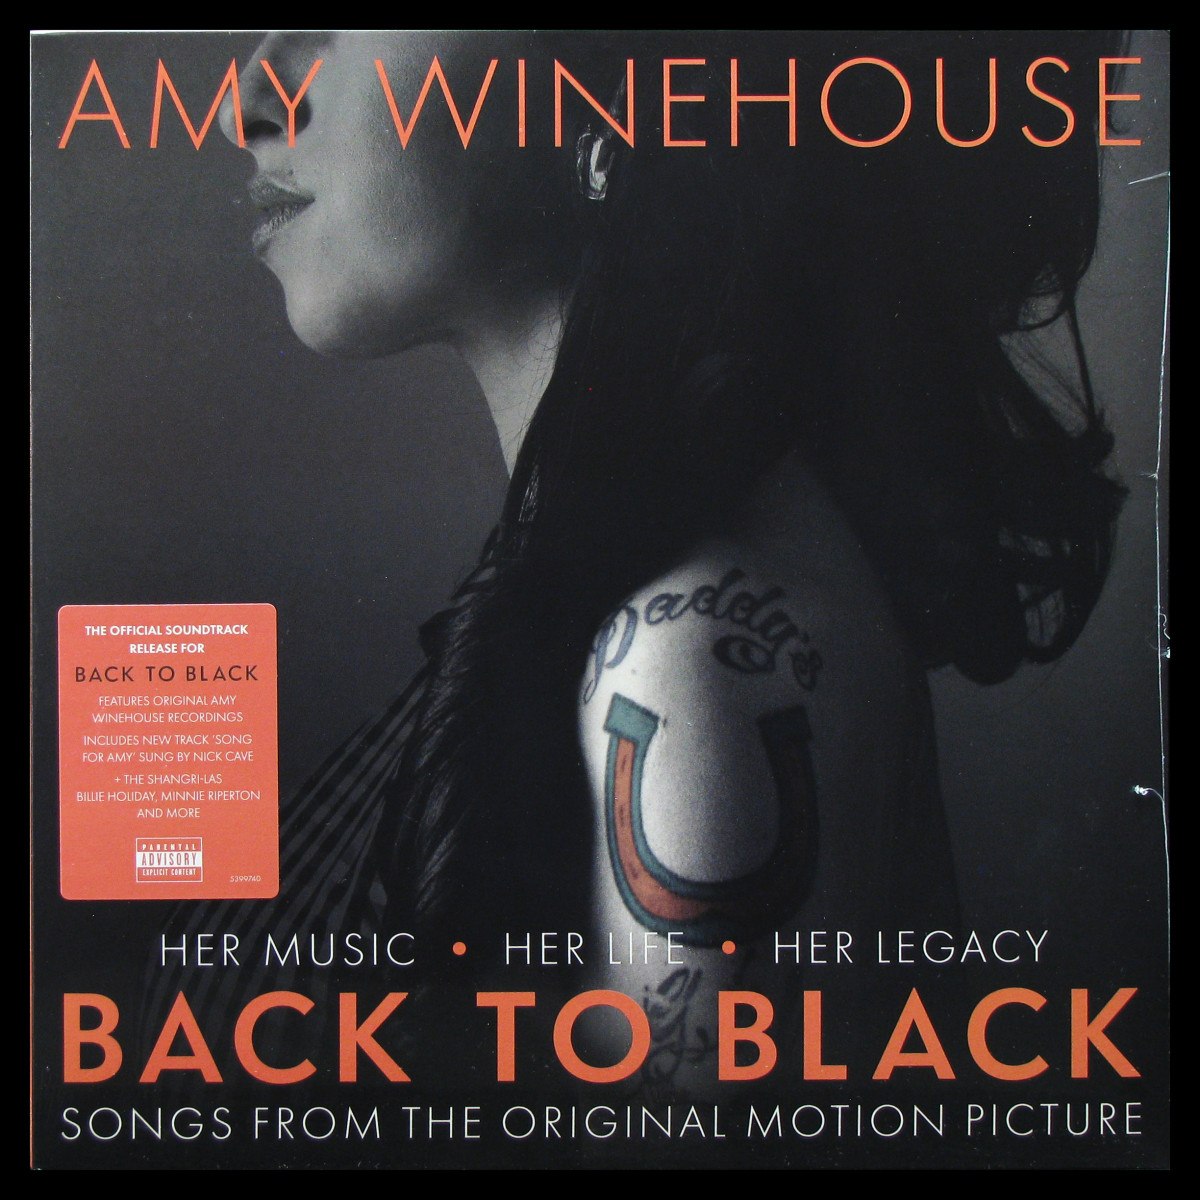 Back To Black (Songs From The Original Motion Picture)